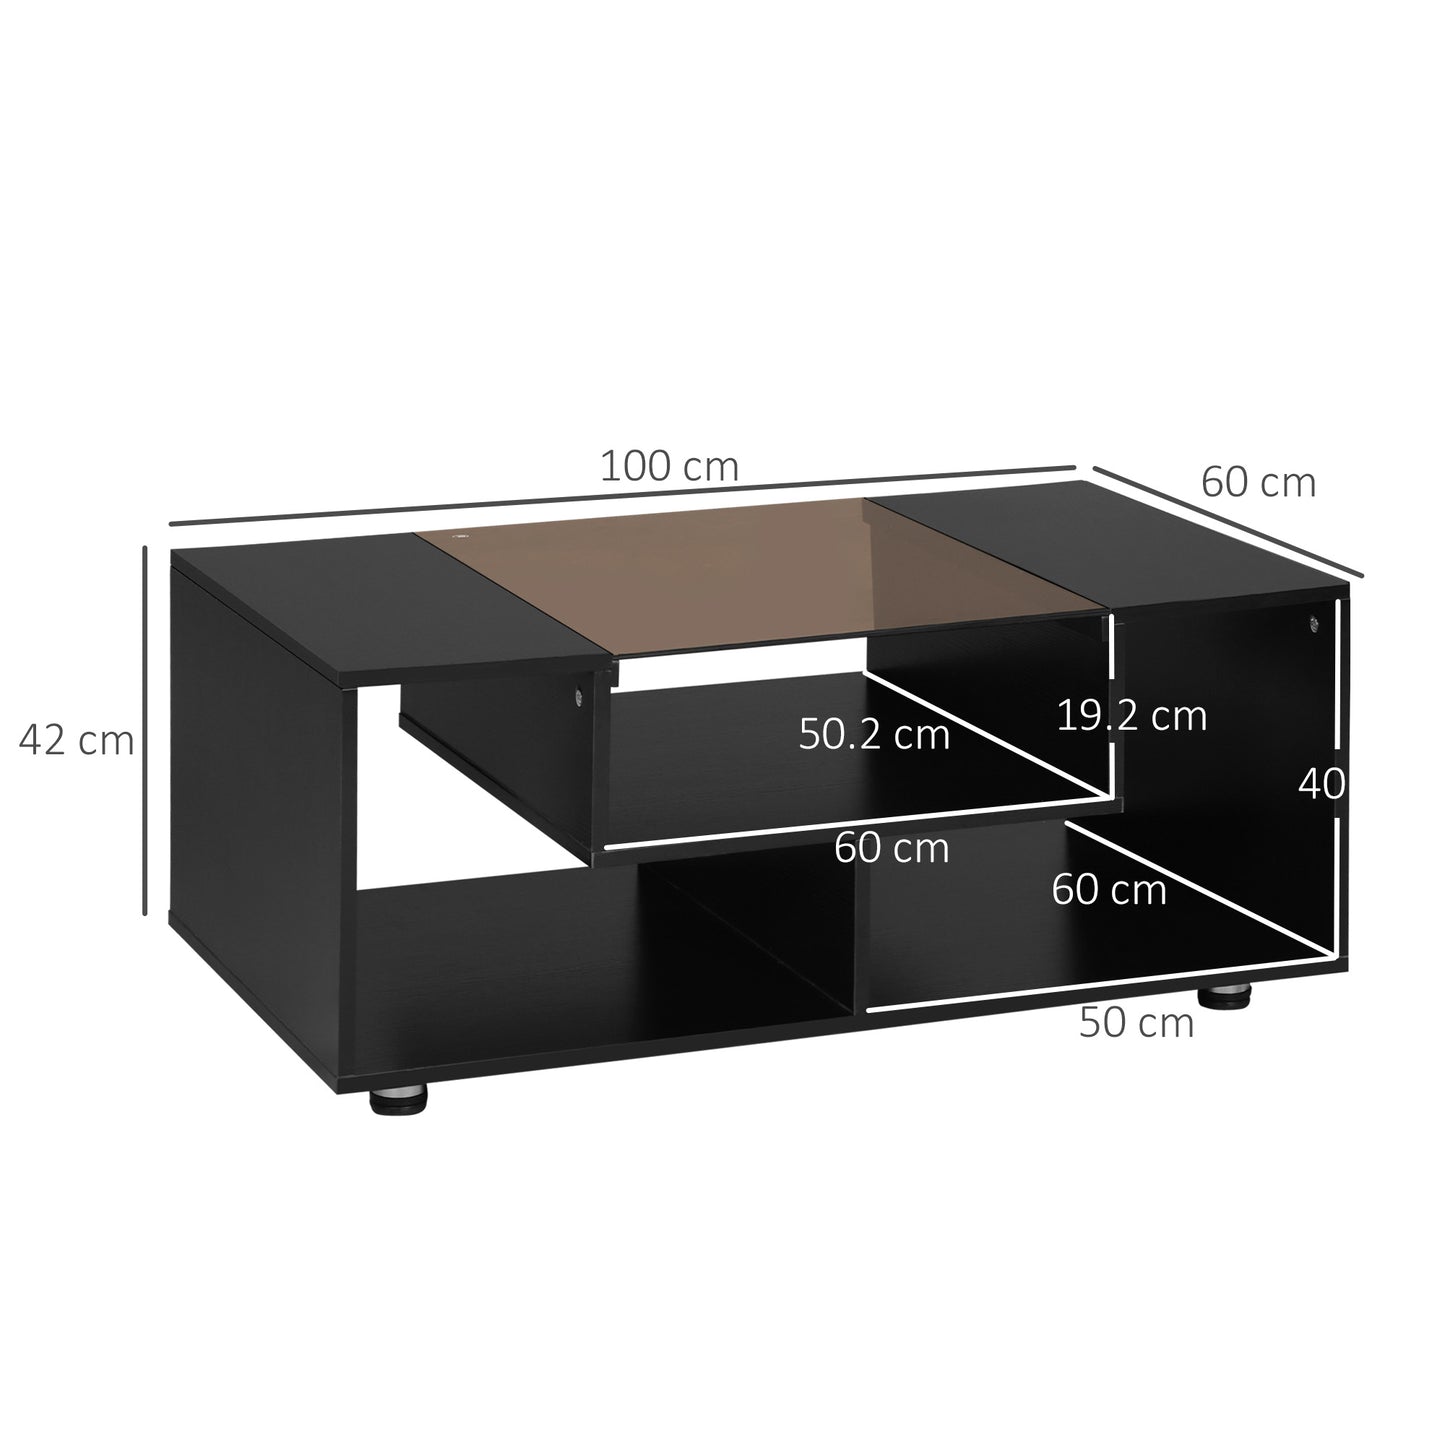 HOMCOM Modern Coffee Table with Tempered Glass Top, Cocktail Table with 3-Tier Storage Shelves for Living Room, Black